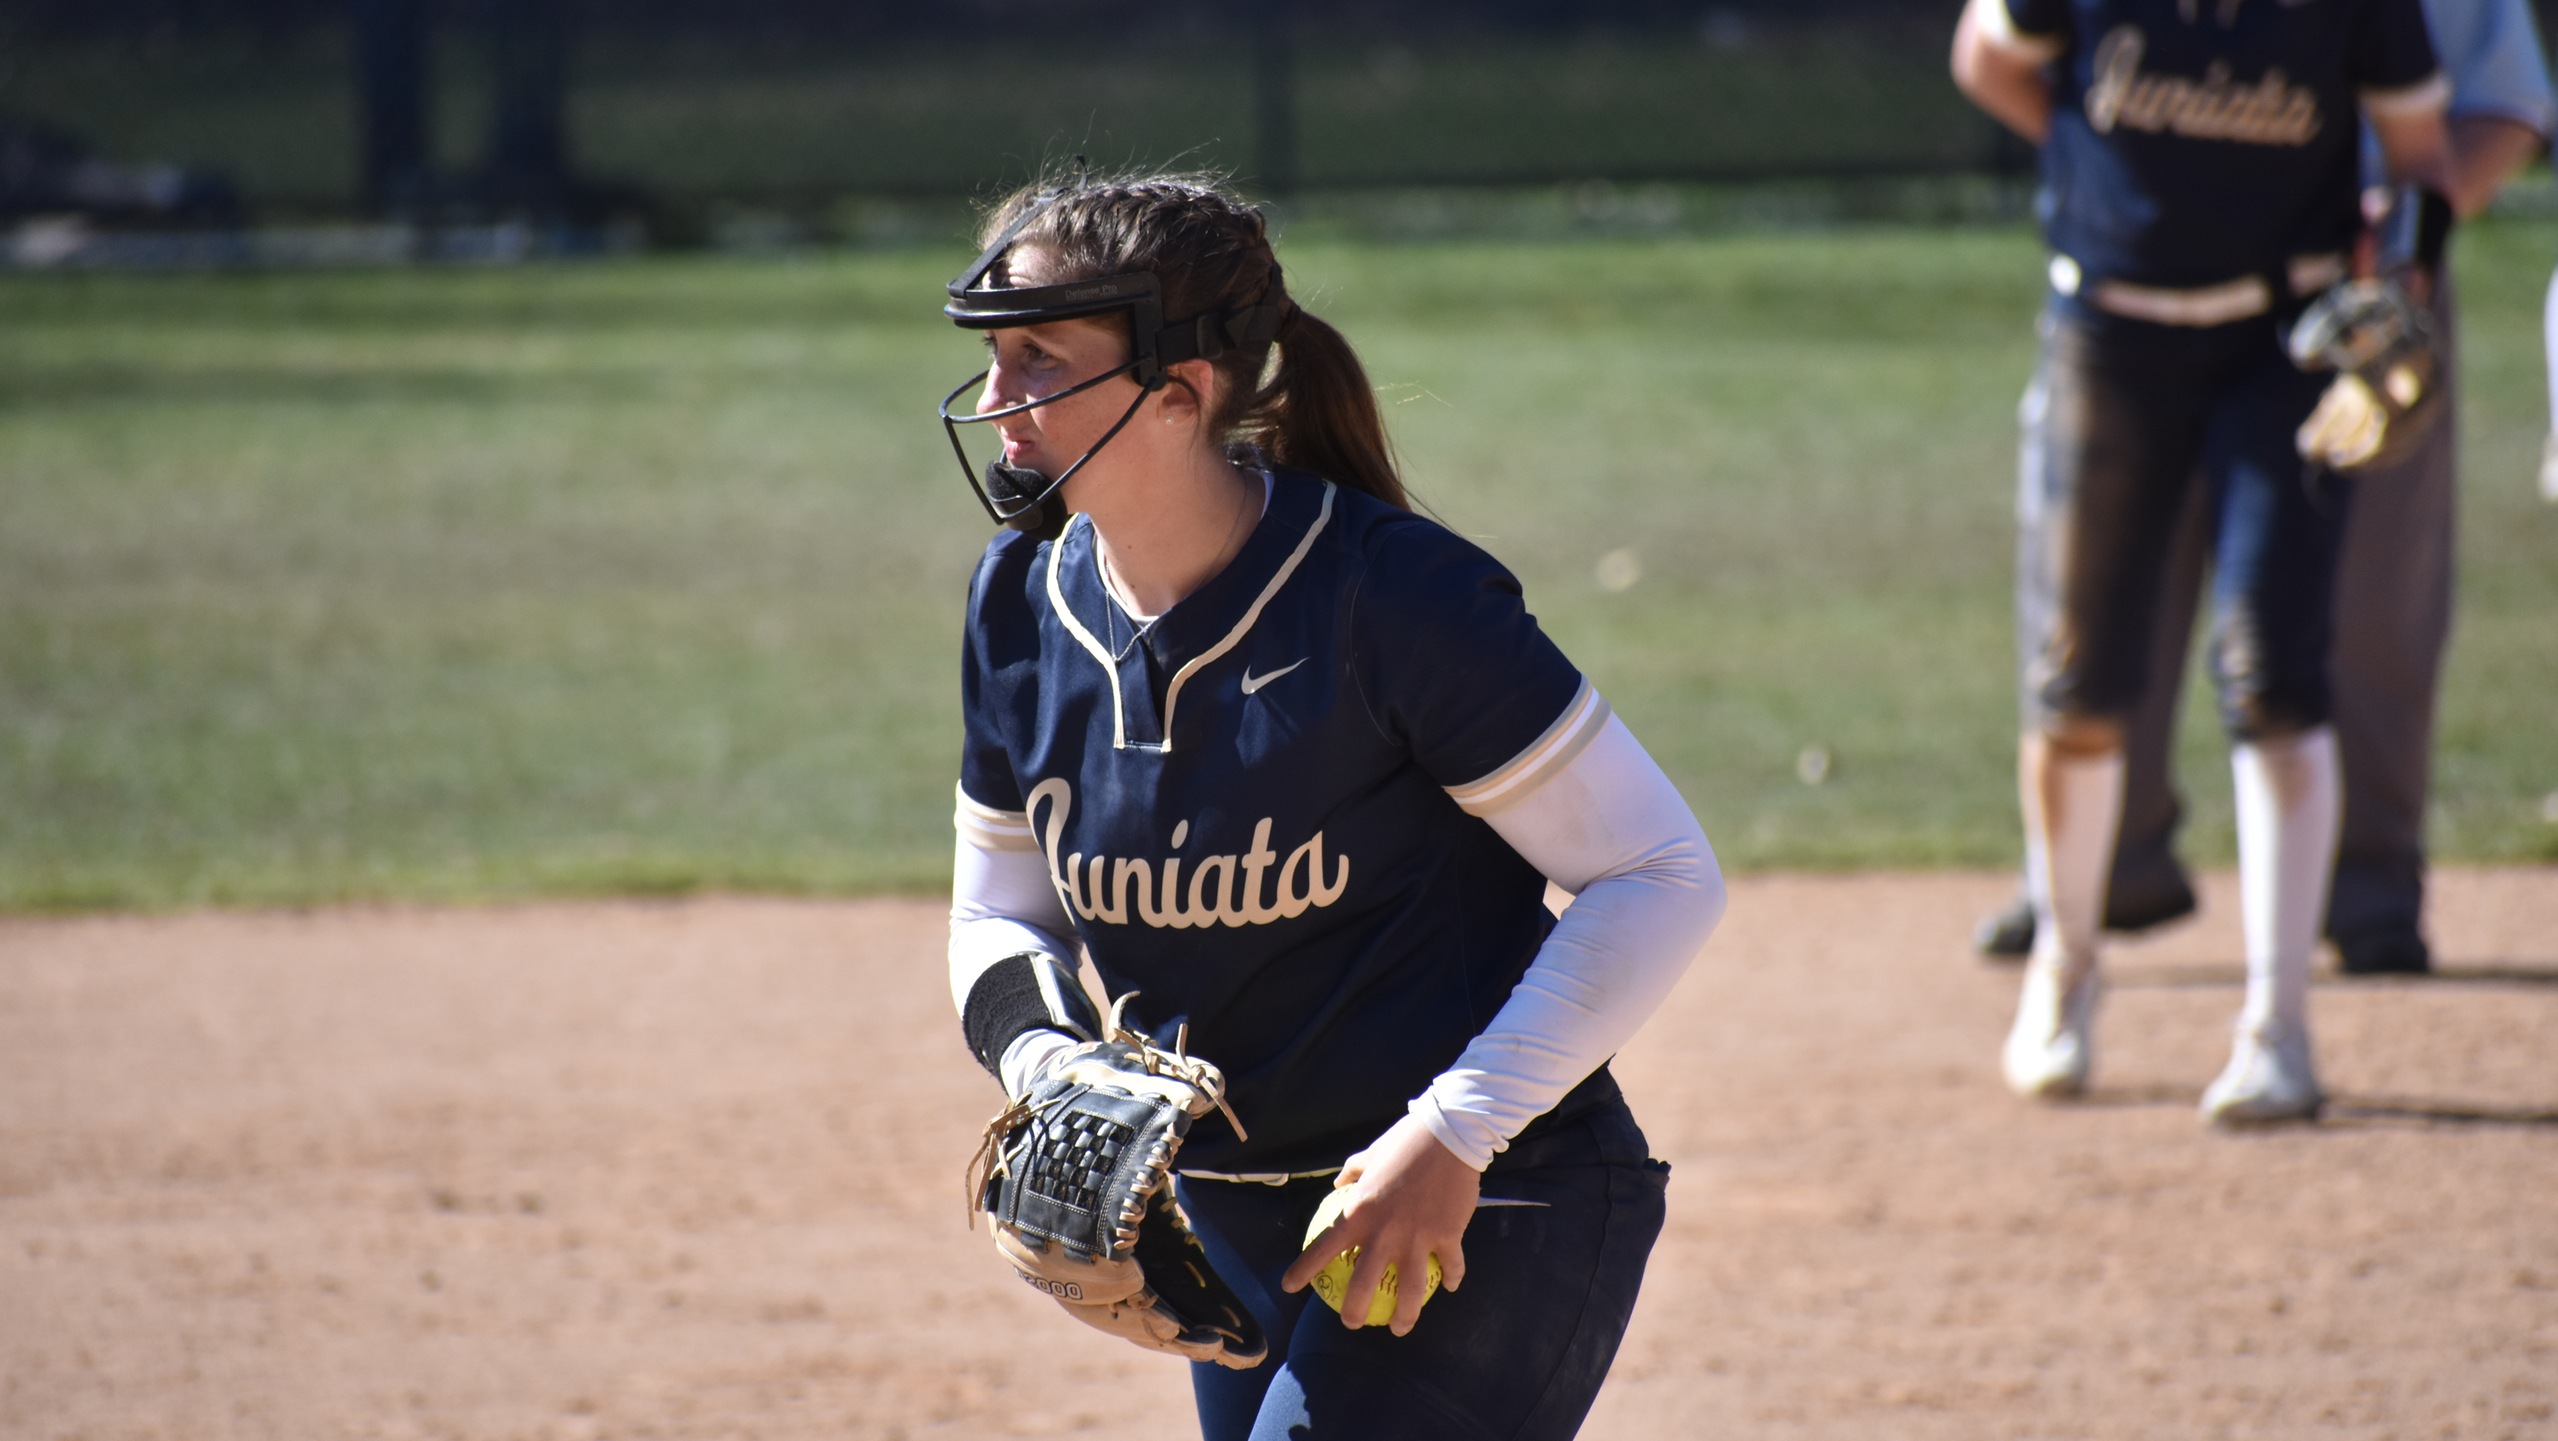 Swank's Gem in Game One & a Big Fifth Inning in Game Two Sees Softball Sweep Rangers